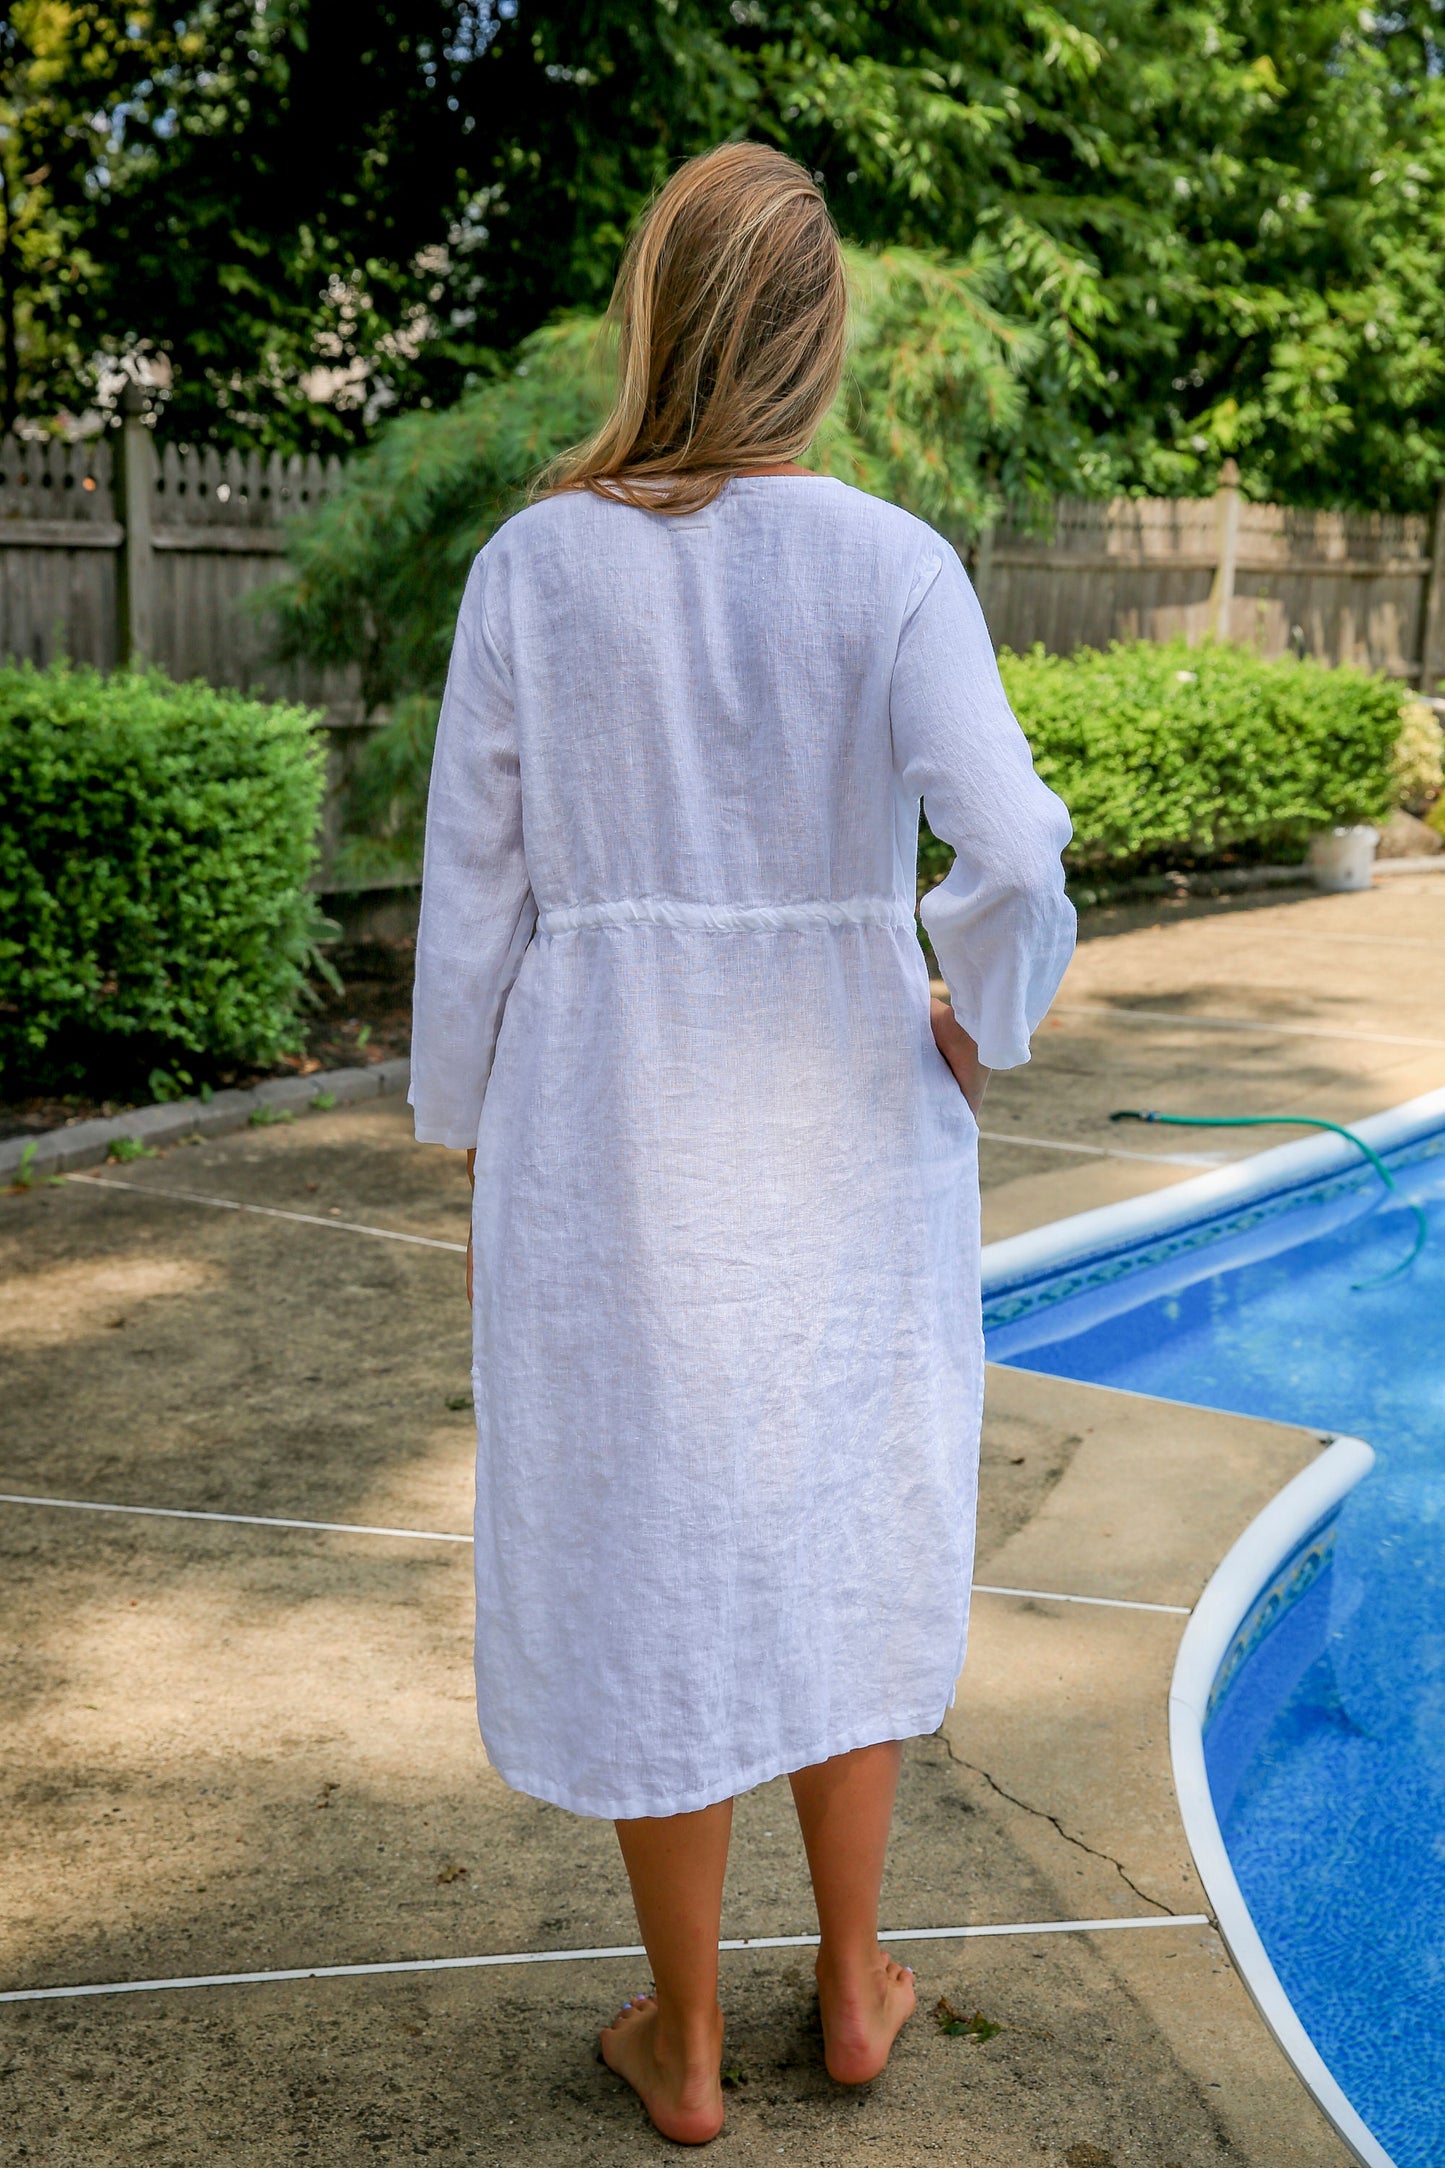 Linen caftan dress: A perfect blend of boho and cottagecore styles.